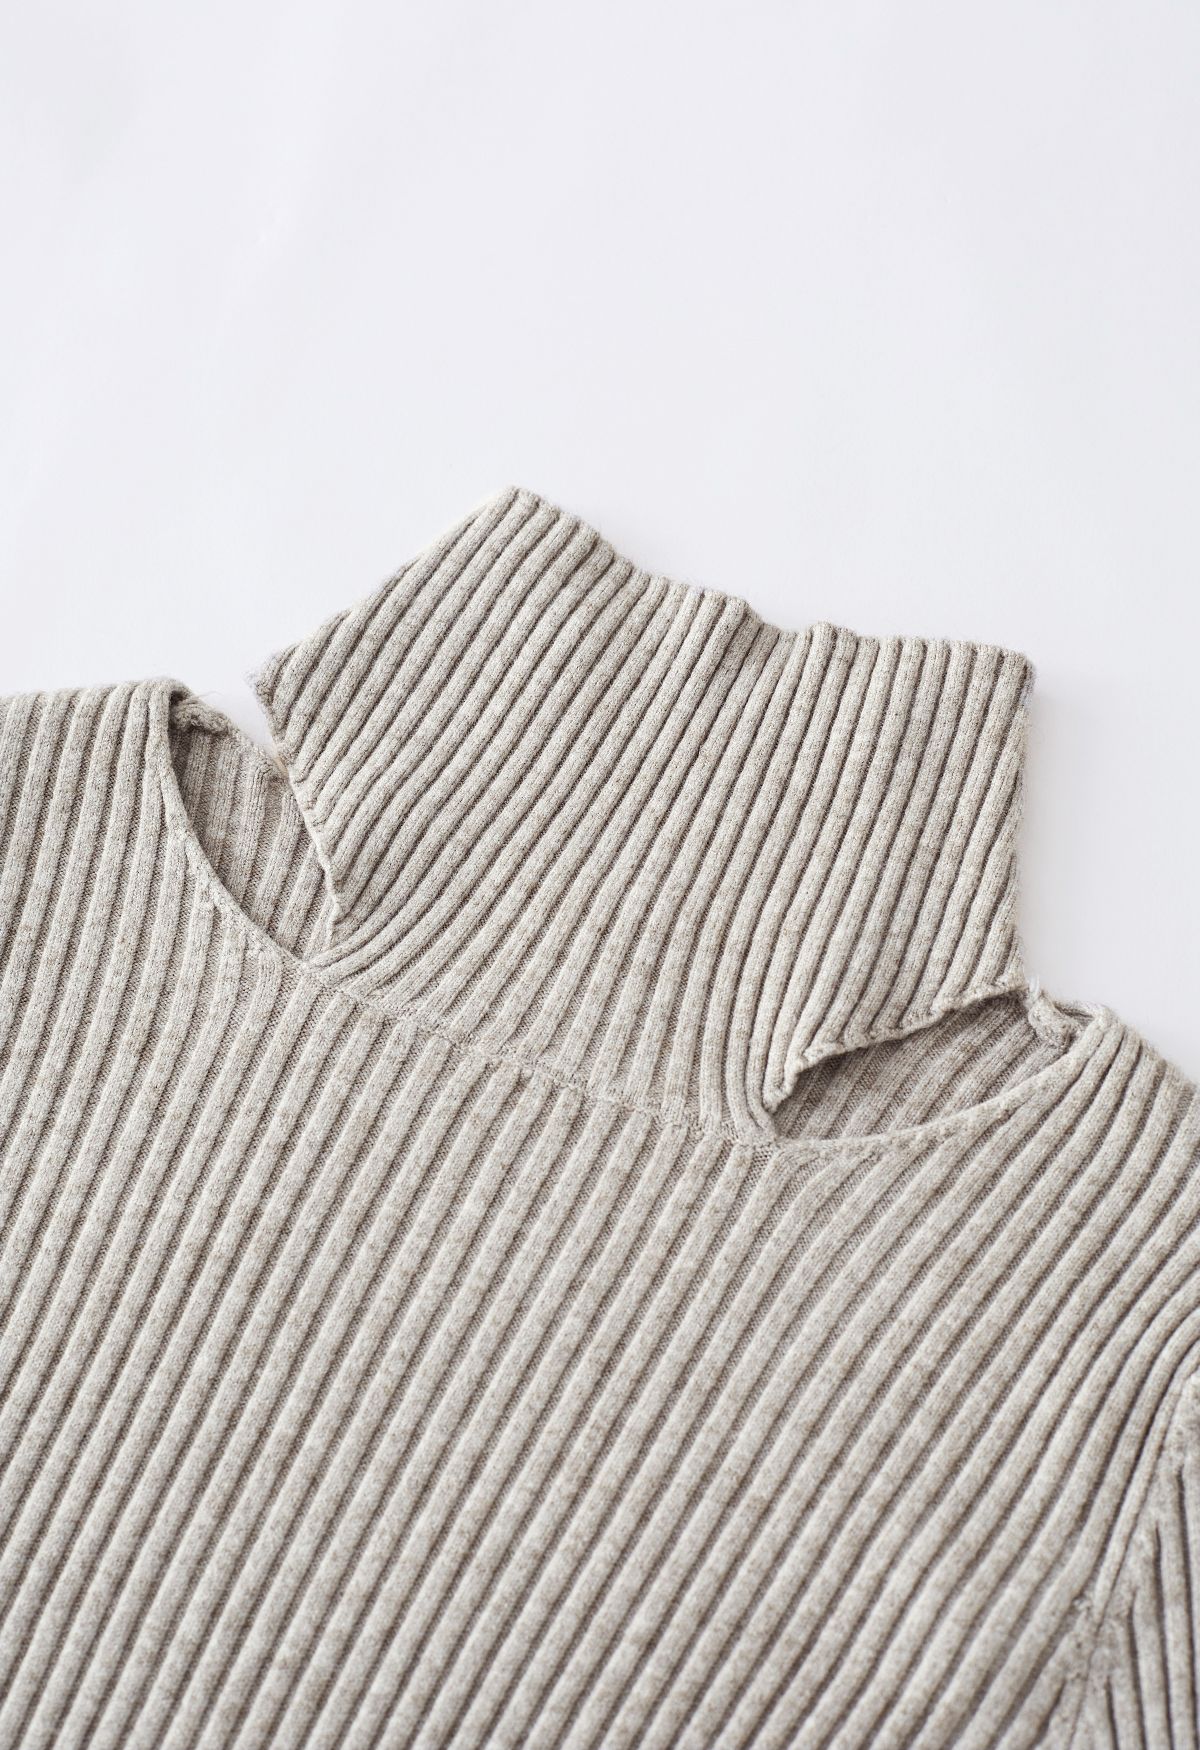 Cutout High Neck Rib Knit Top in Linen